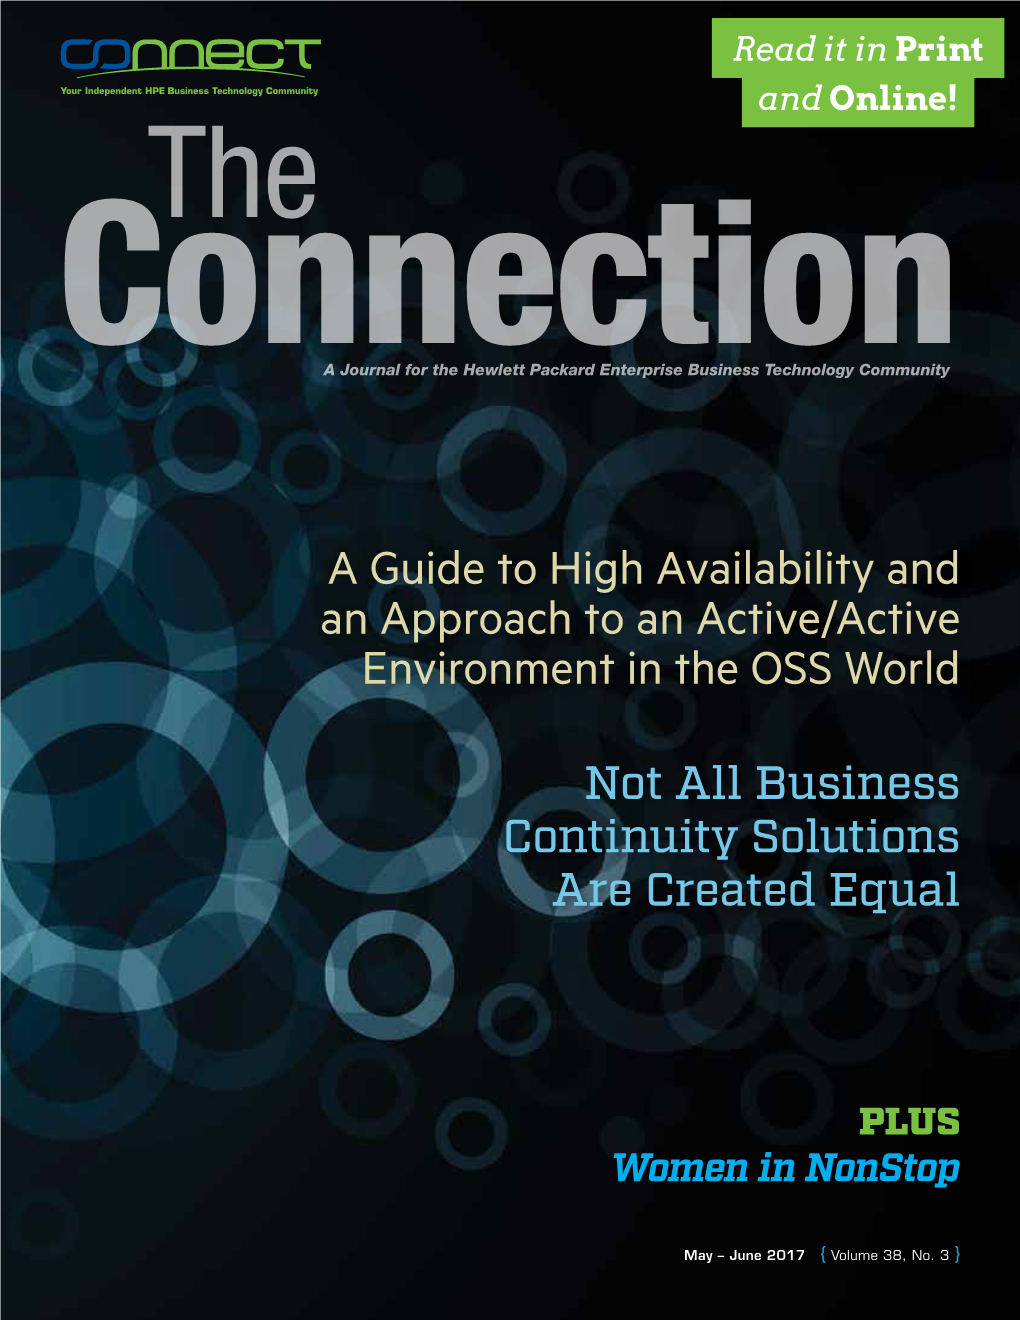 A Guide to High Availability and an Approach to an Active/Active Environment in the OSS World